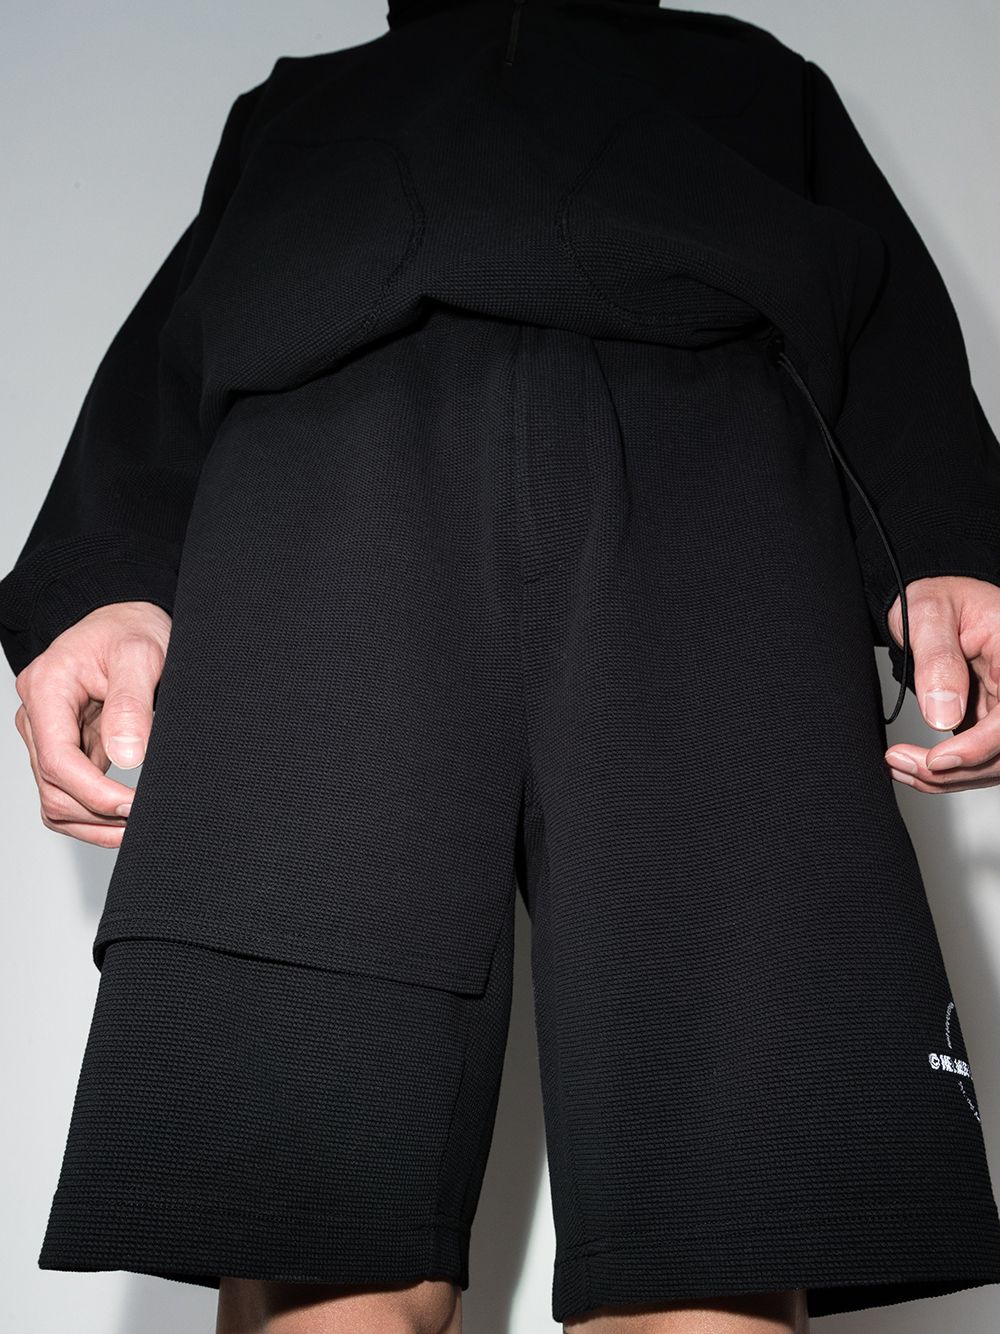 Shop Helmut Lang logo-embroidered track shorts with Express Delivery ...